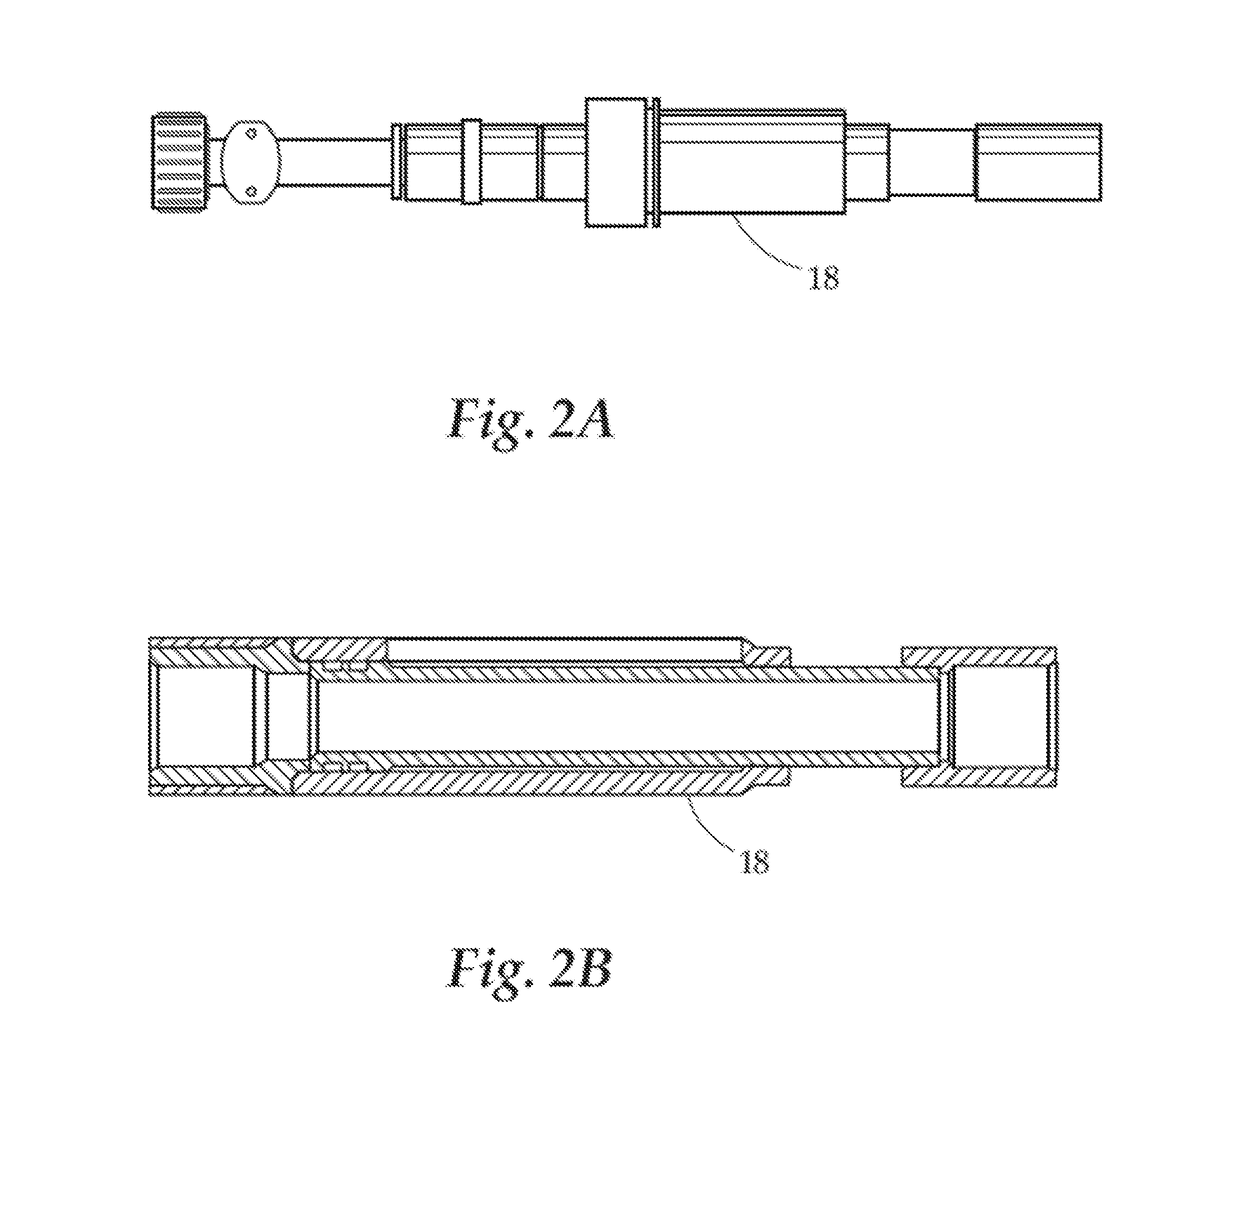 Self-Supported Hose Delivery Assembly